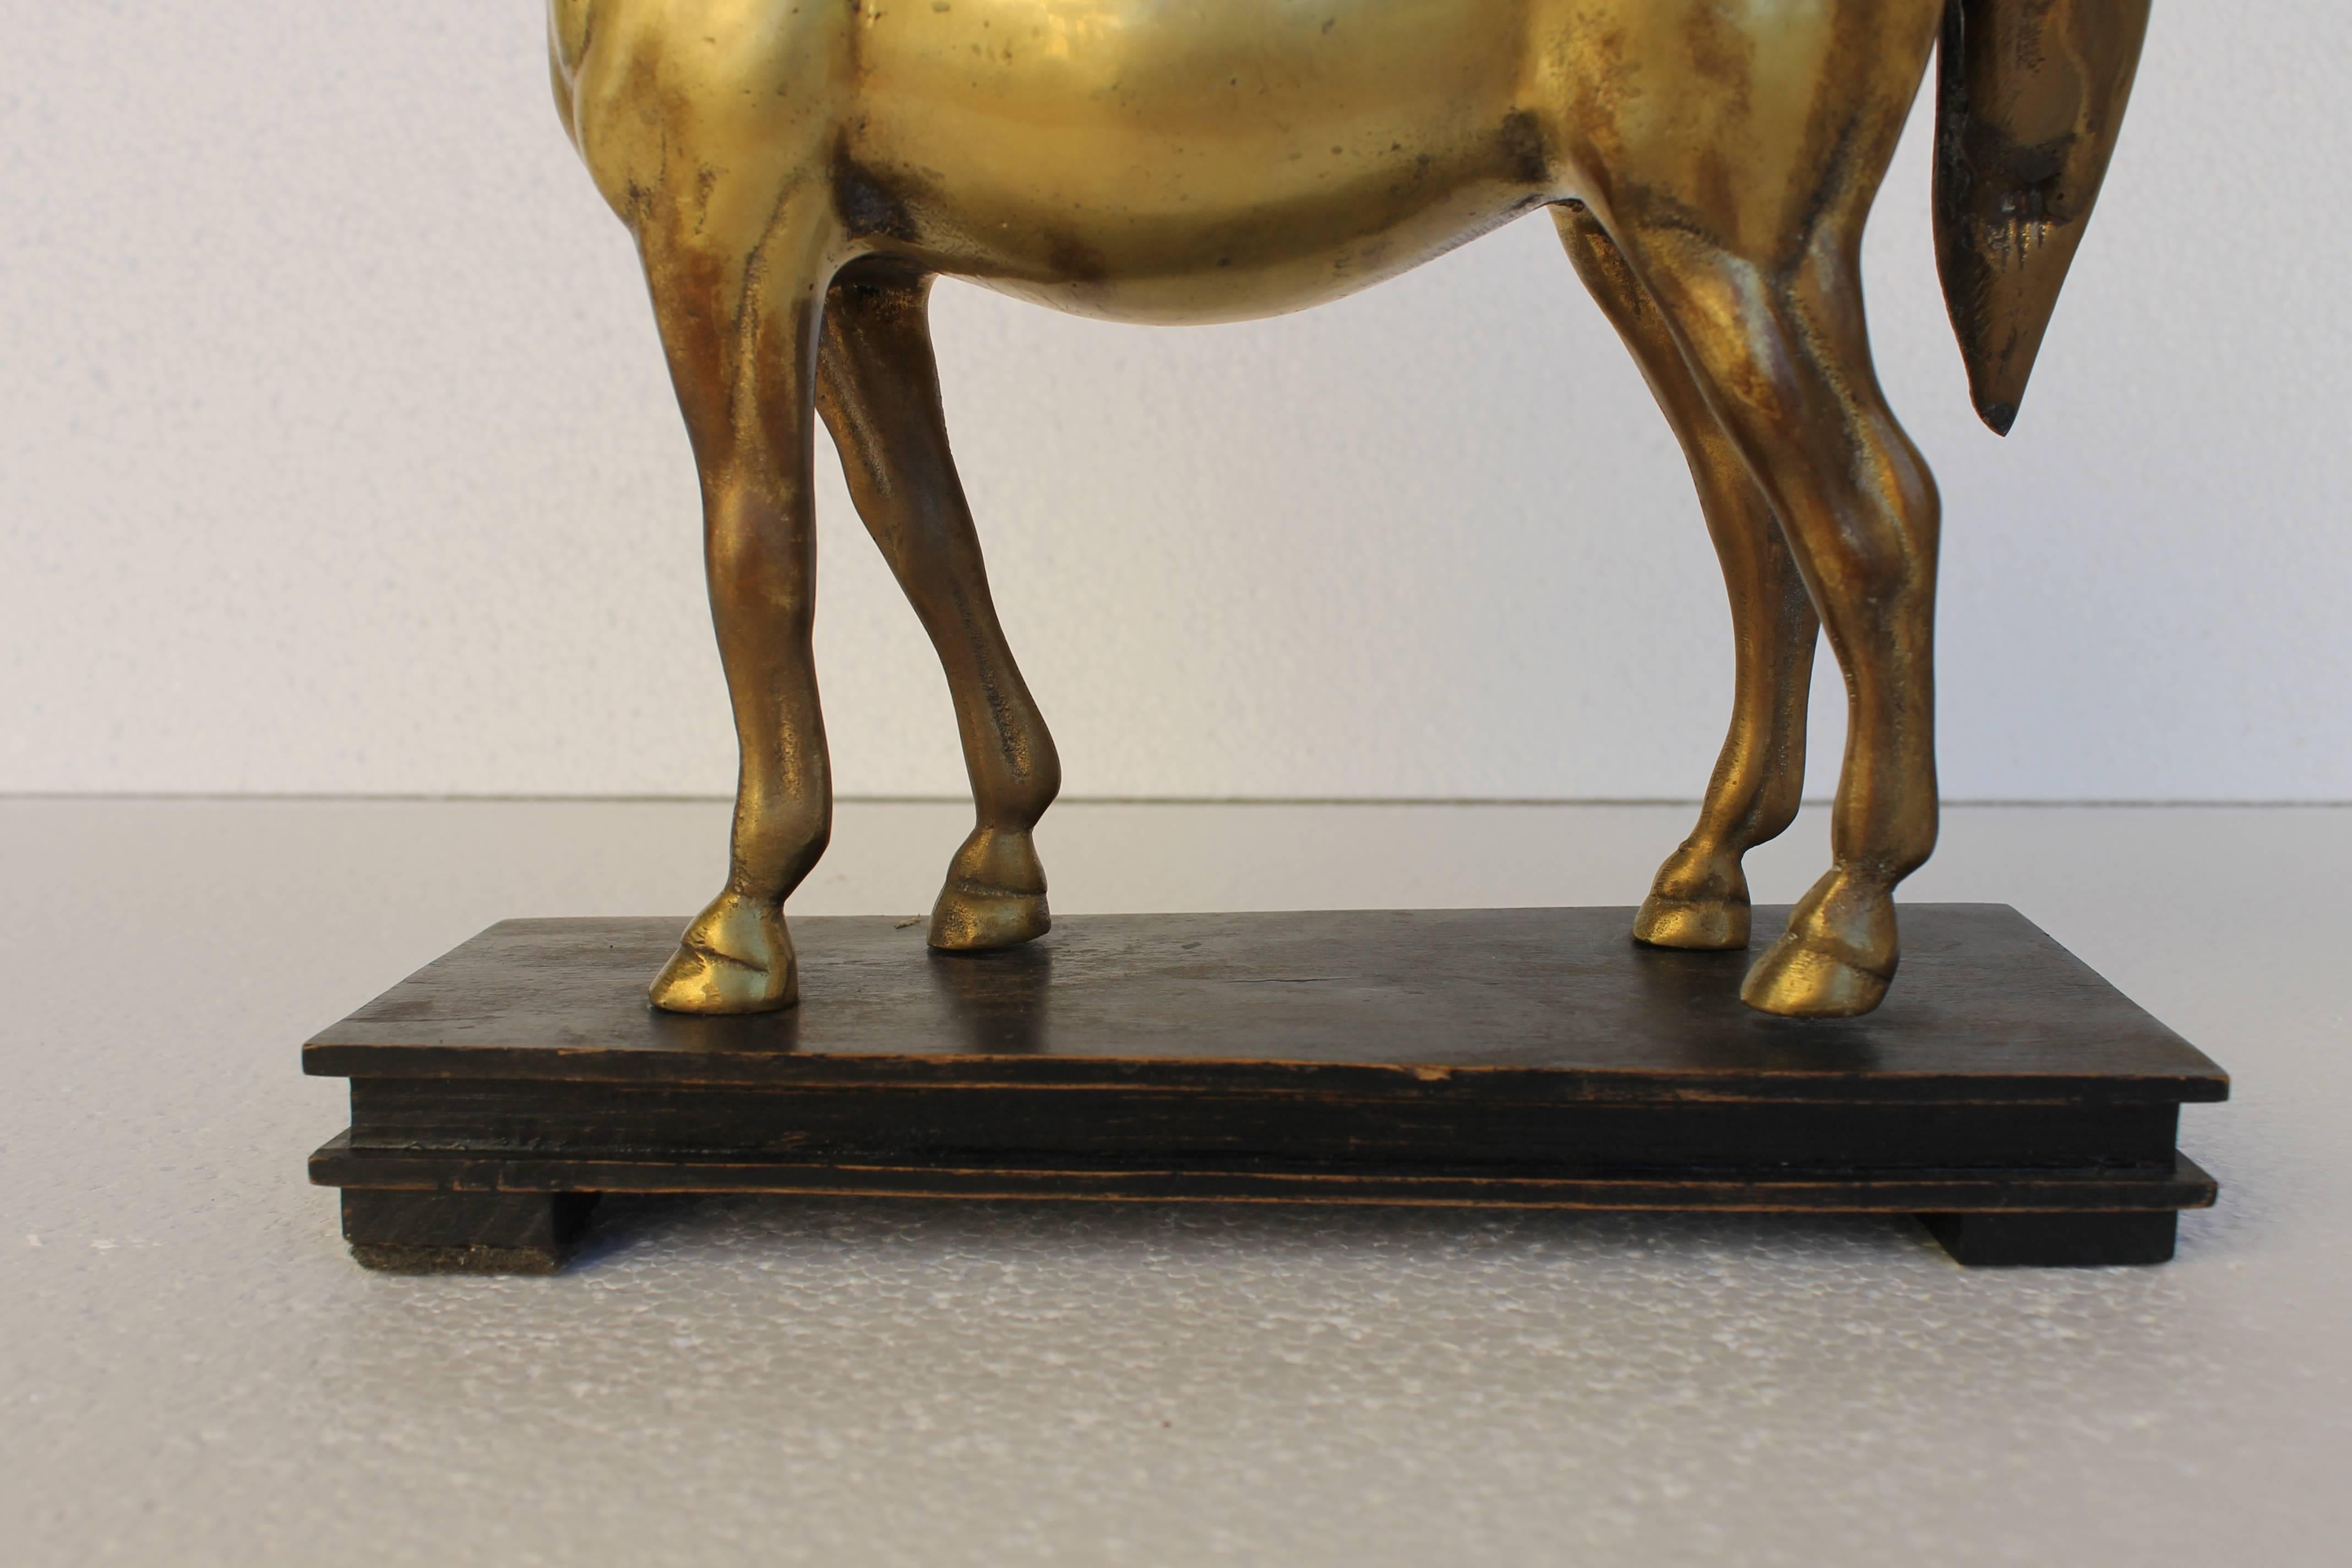 Brass and Wood Horse Model, 1940s (Messing)